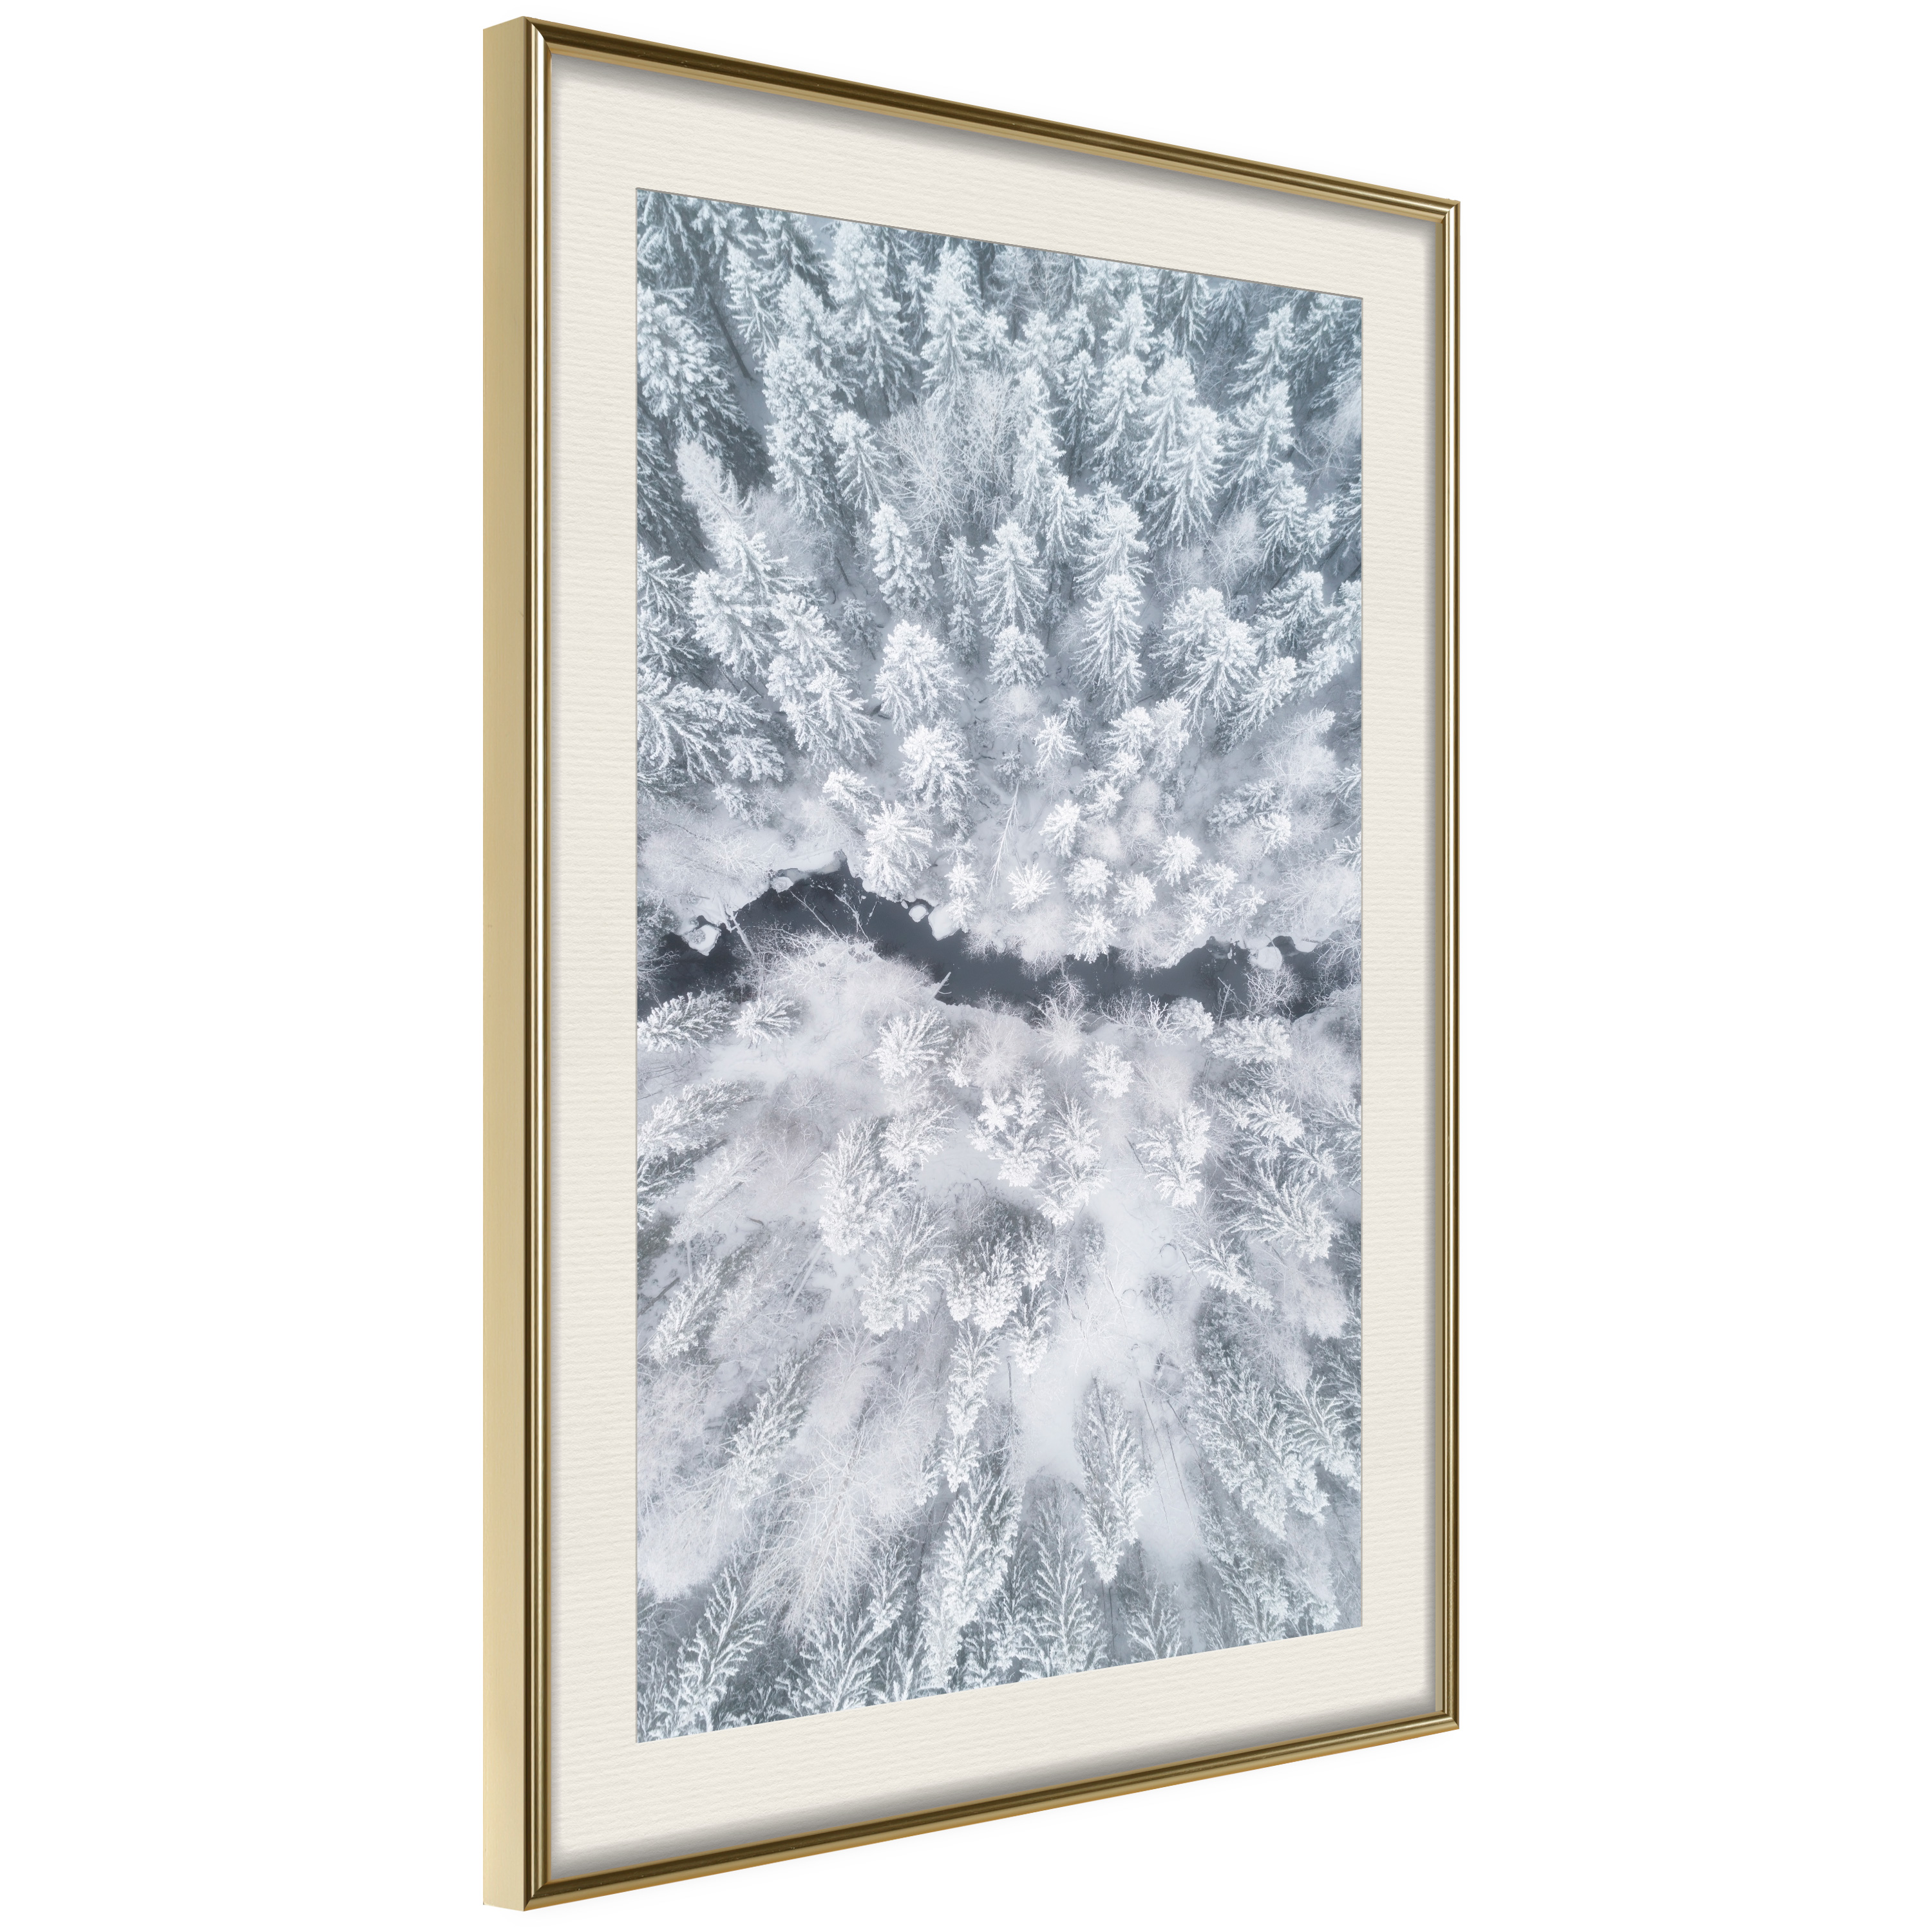 Poster - Winter Forest From a Bird's Eye View - 30x45